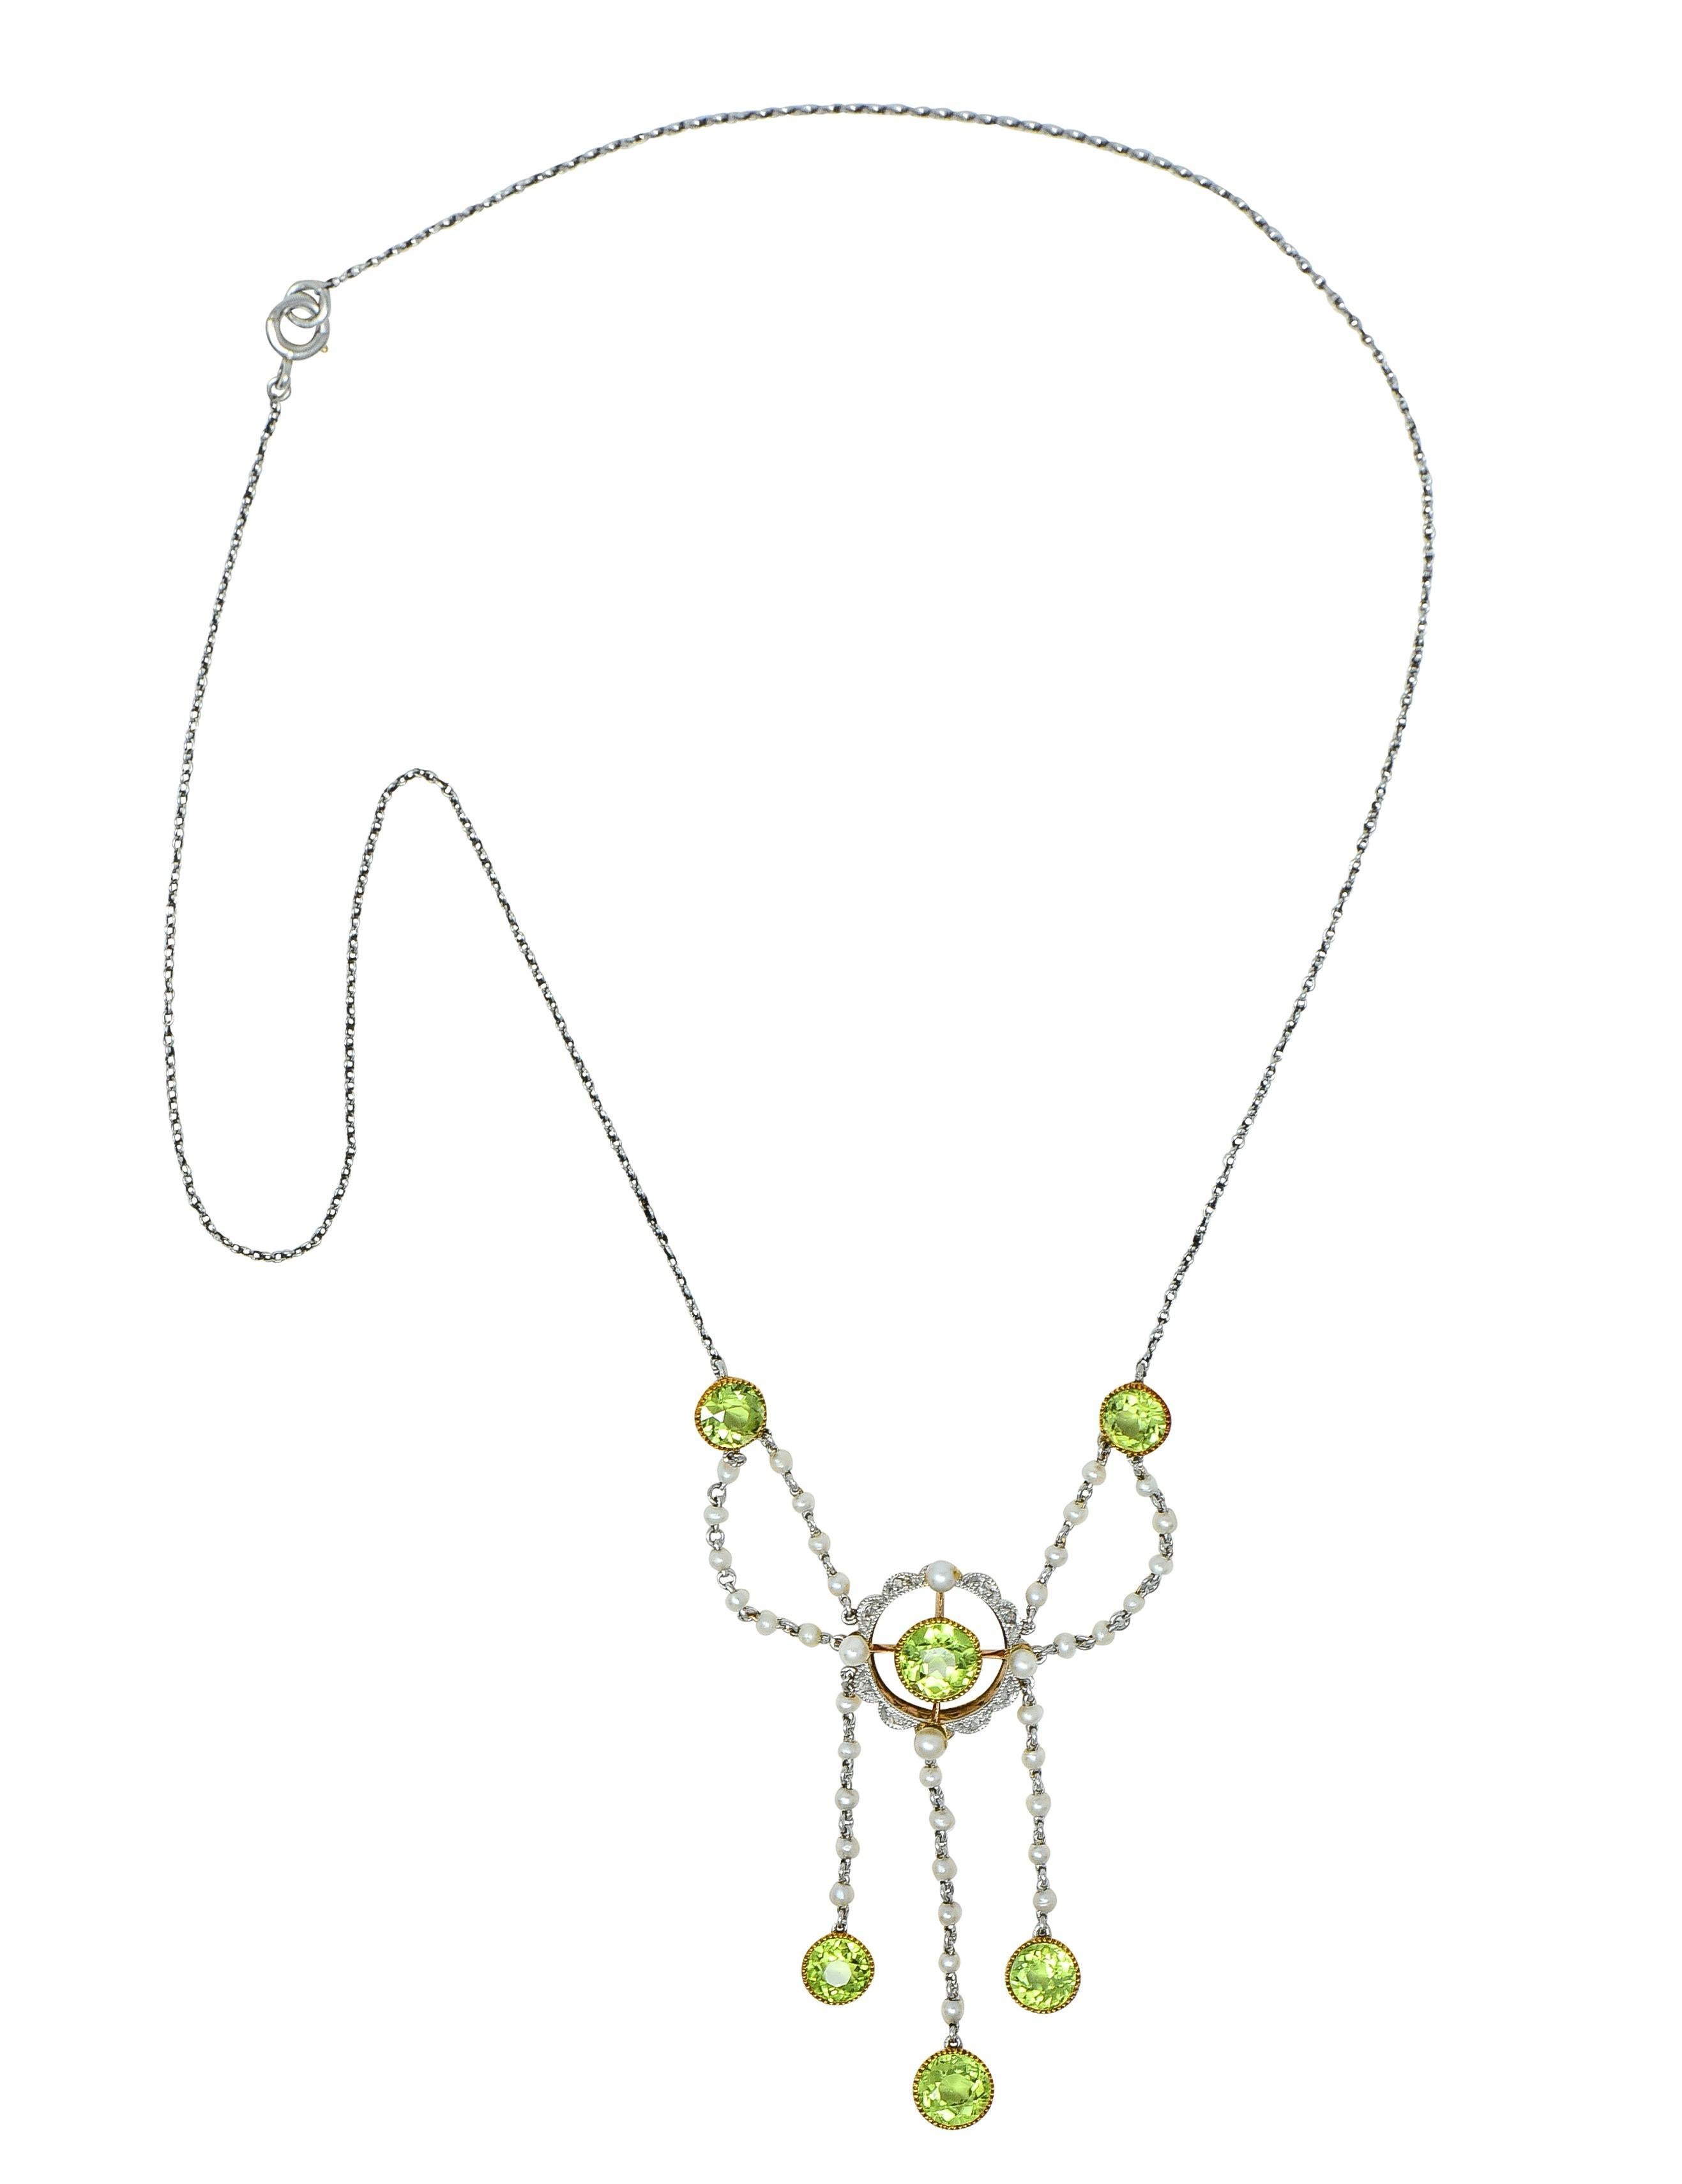 Designed as a 1.0 mm cable link chain with swagged fringe station featuring round cut peridot 
Ranging in size from 4.5 to 5.5 mm - transparent medium yellowish green in color
Set across top of station and fringe in yellow gold milgrain bezels
With